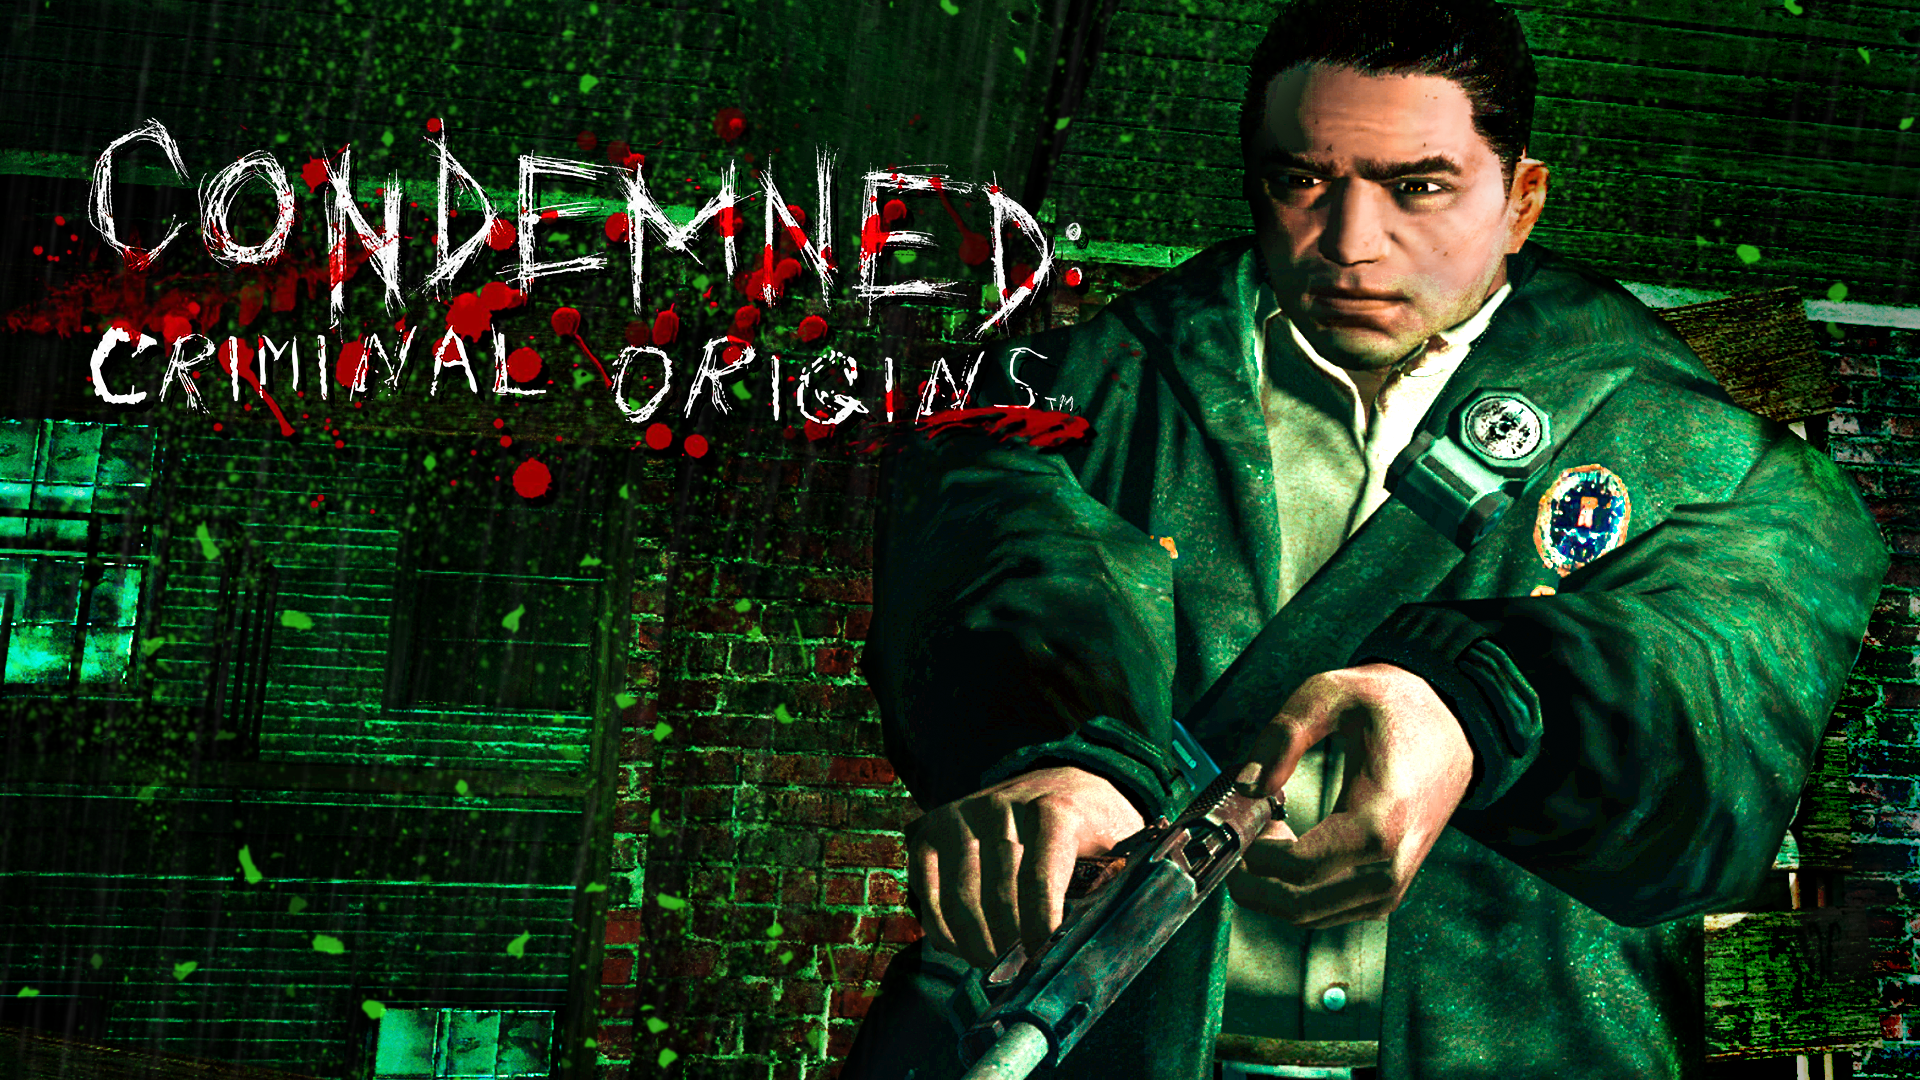 Condemned: Criminal Origins (2005) Wallpaper by AlphaYellow